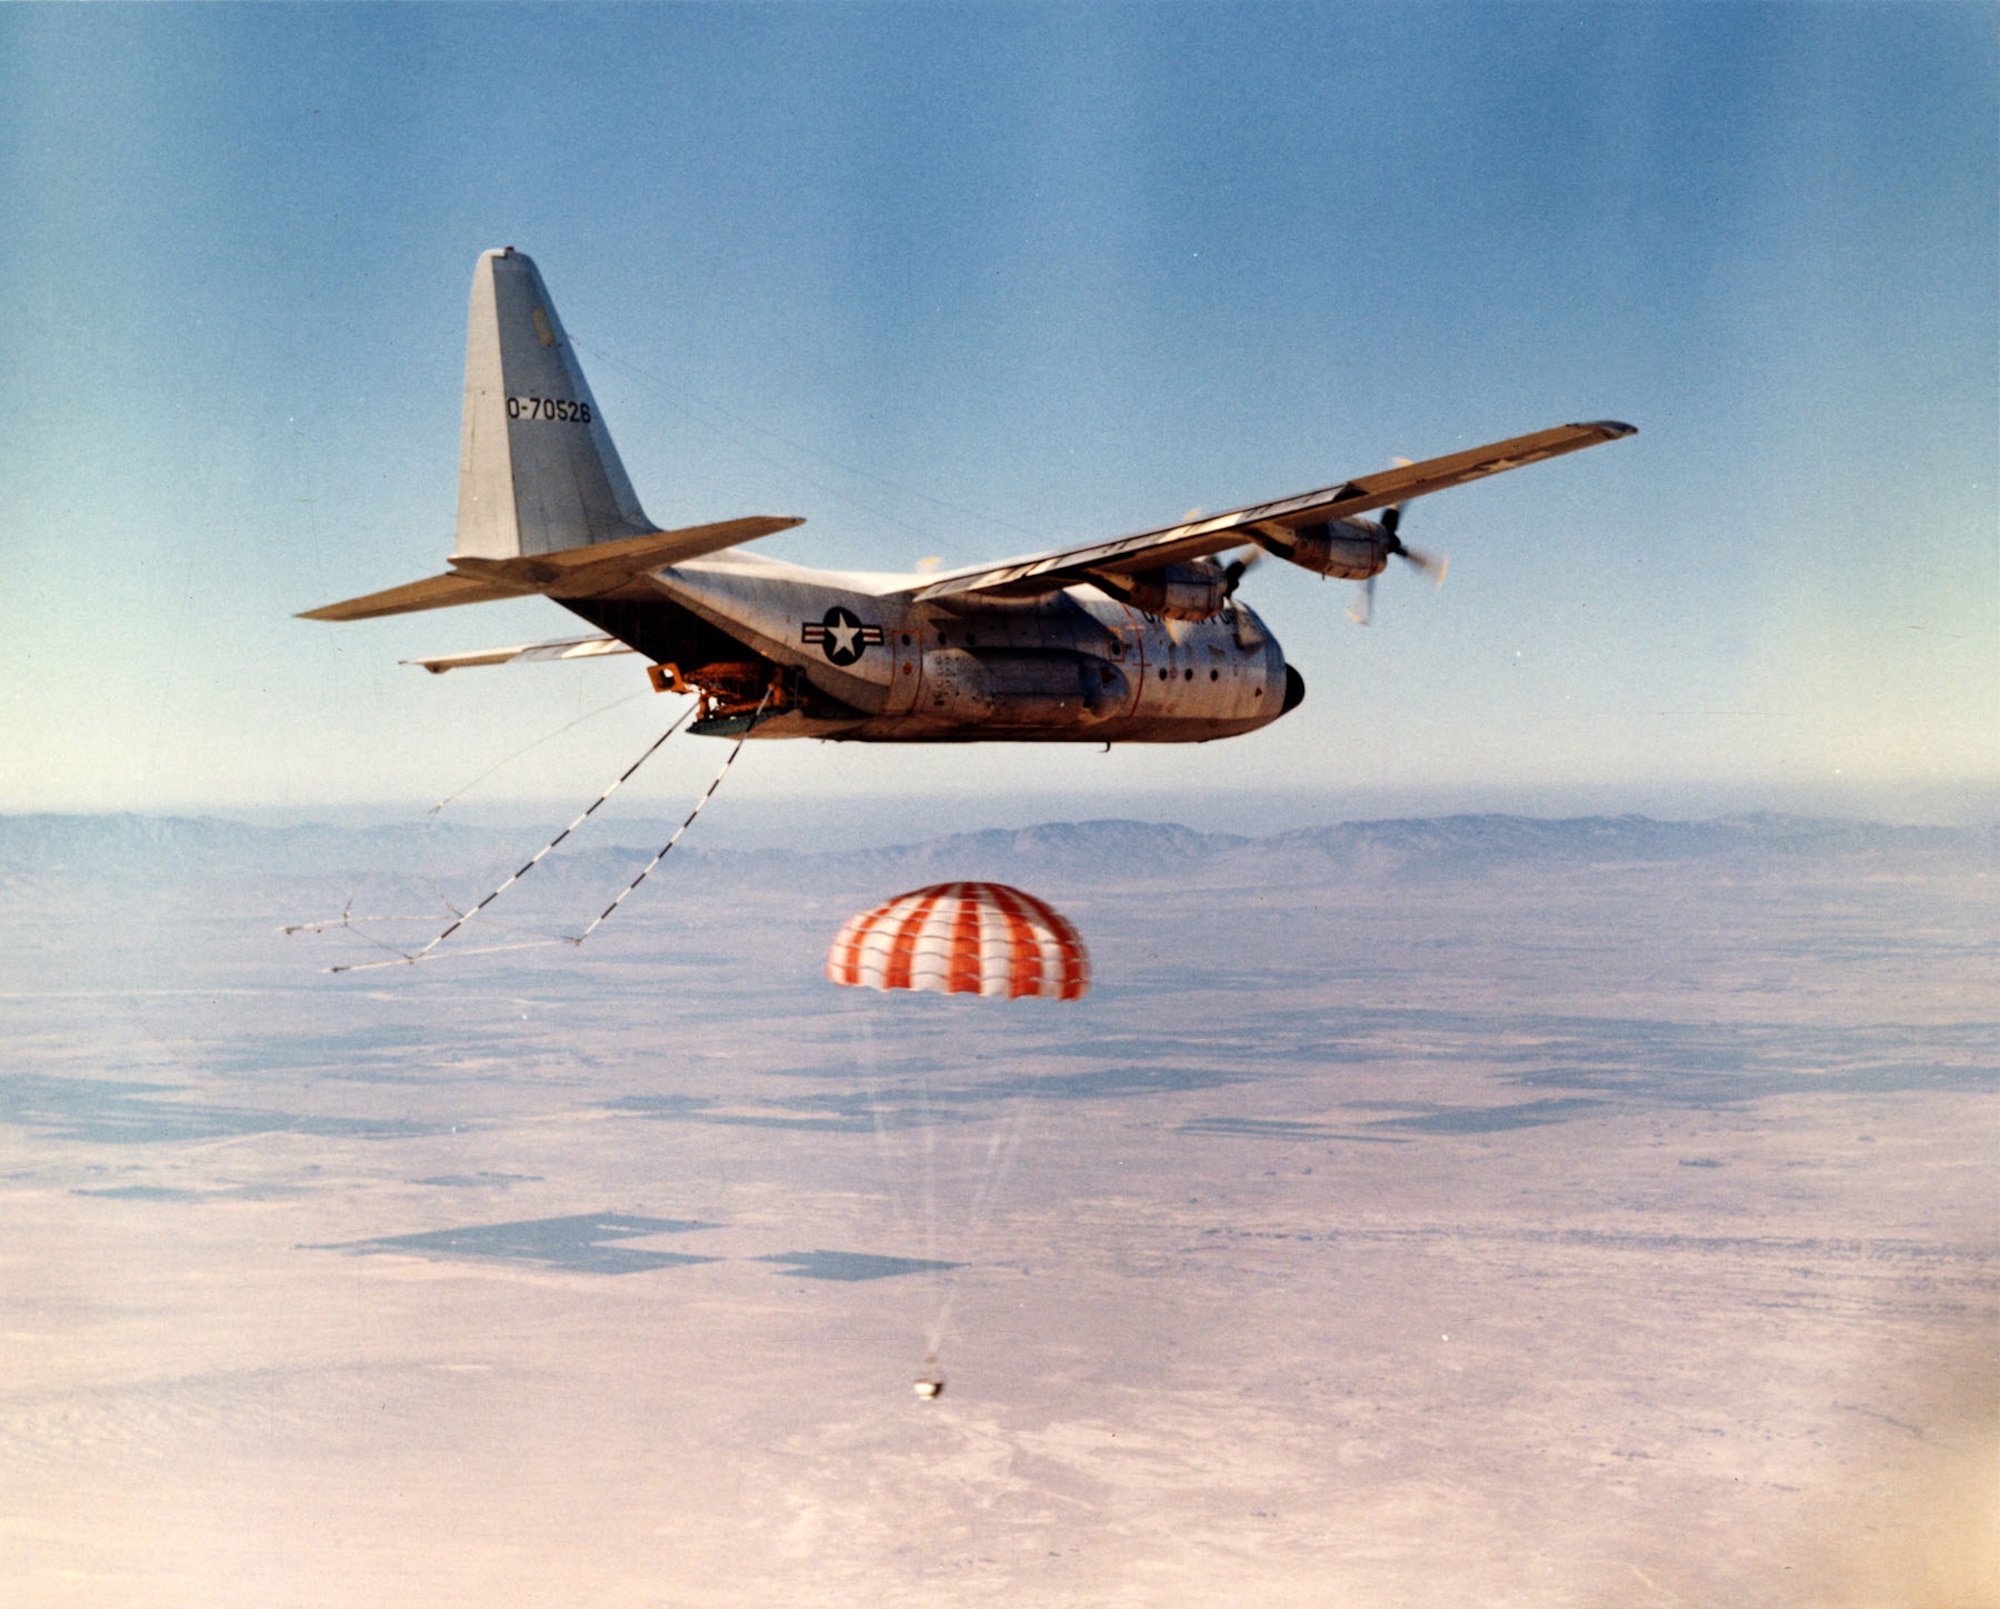 An Air Force JC-130B practices catching a satellite “bucket” with grappling gear and winch at Edwards AFB, Calif., 1969. (U.S. Air Force photo)